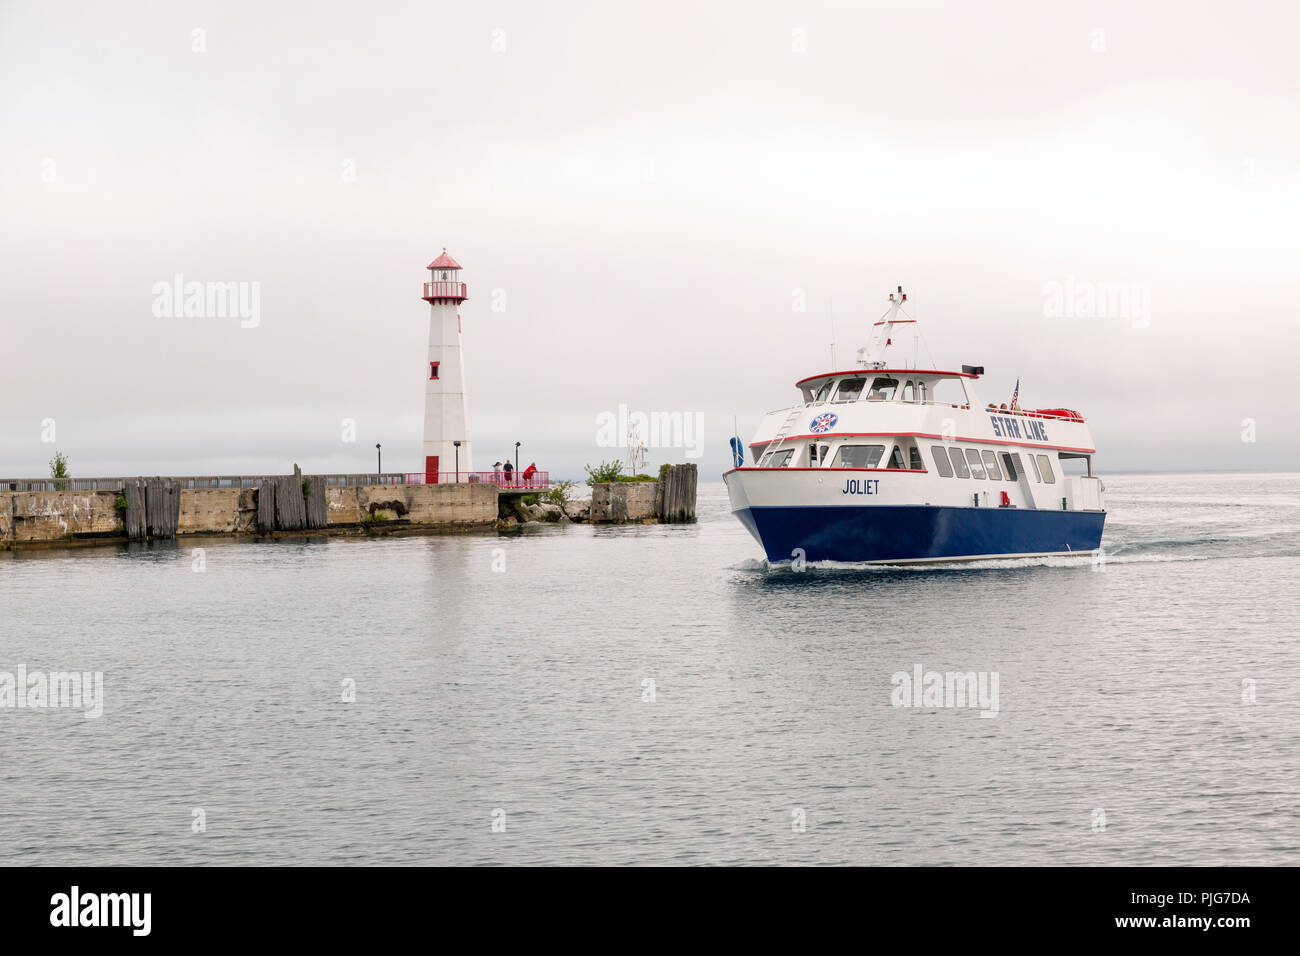 Tourists on a ferry approaching pier in St. Ignace Michigan. Wawatom lighthouse on the pier. Stock Photo